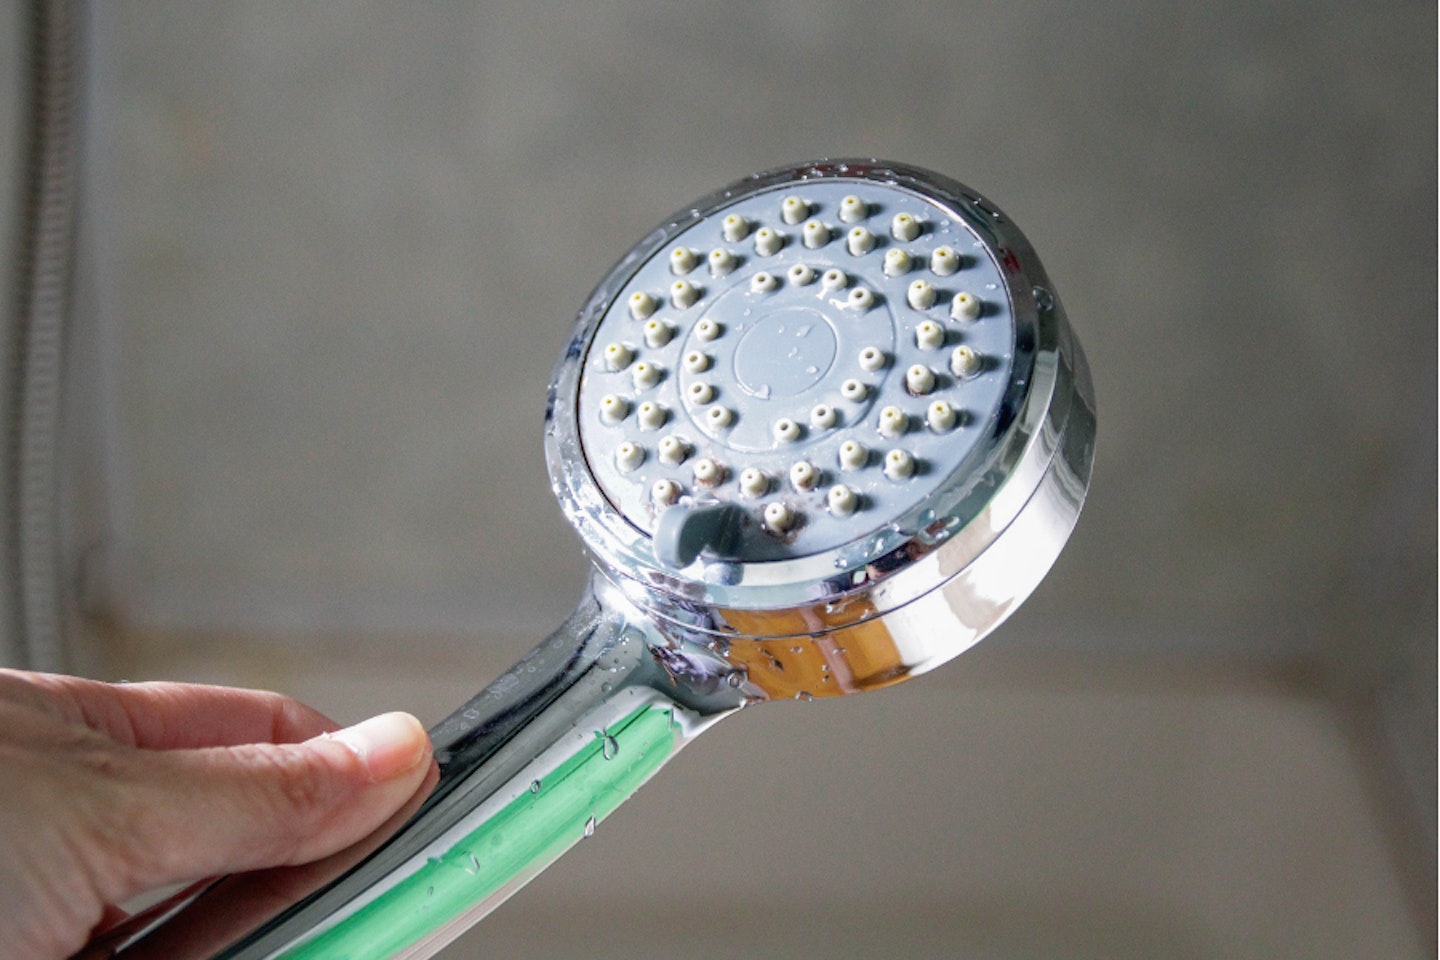 Tips for Finding the Right Shower Hose